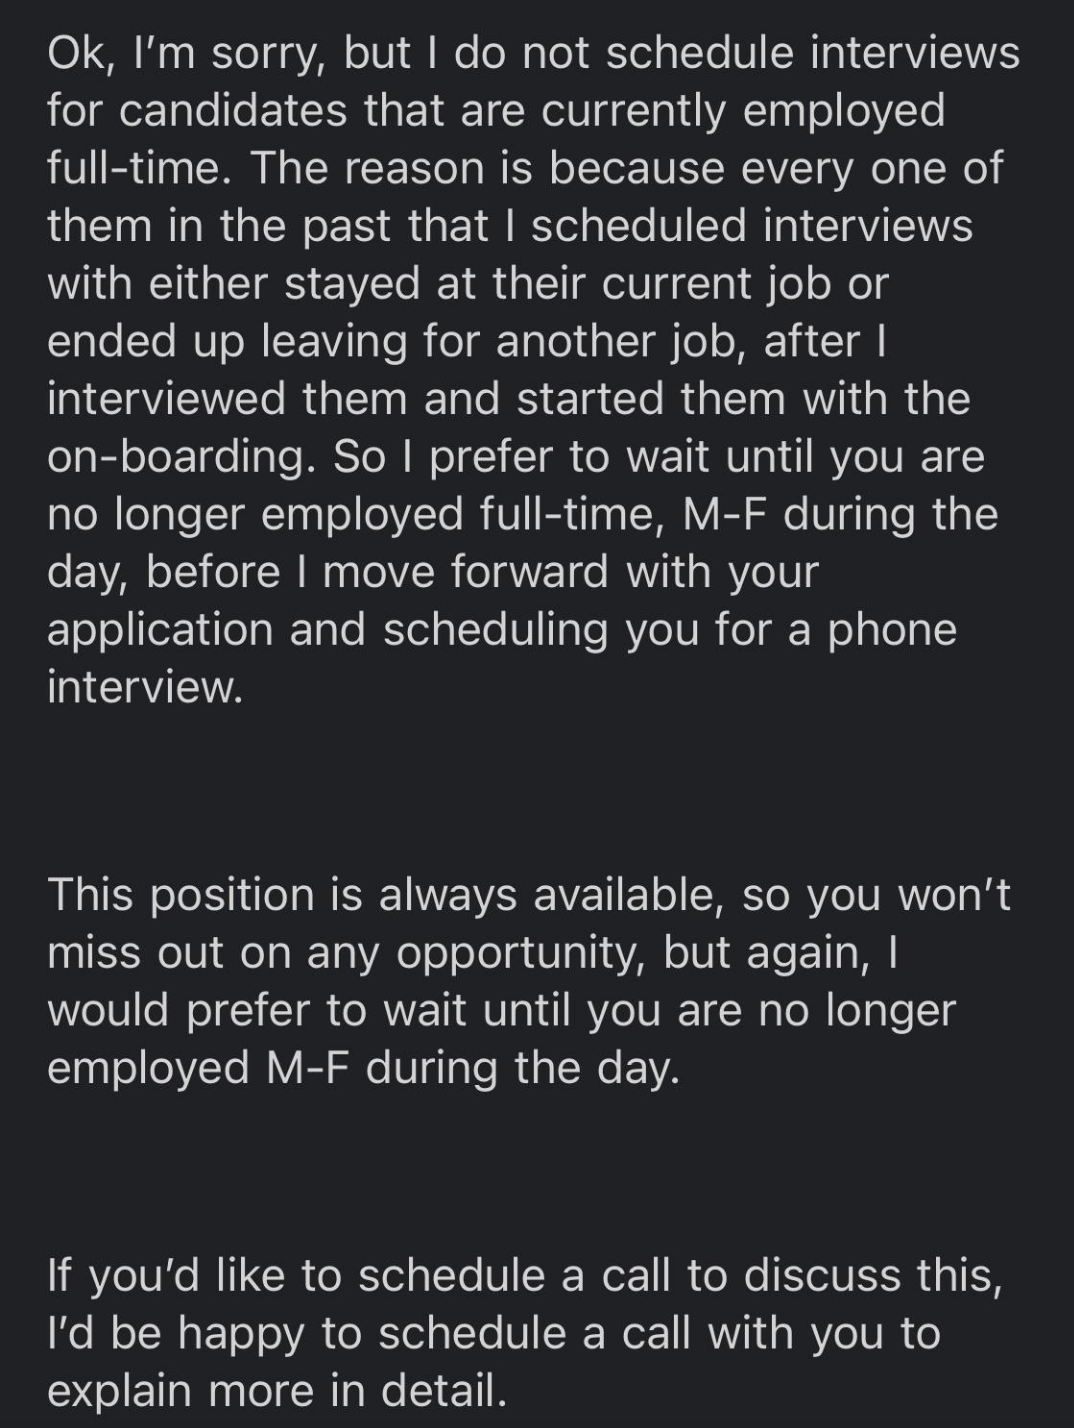 &quot;I do not schedule interviews for candidates that are currently employed full-time&quot;